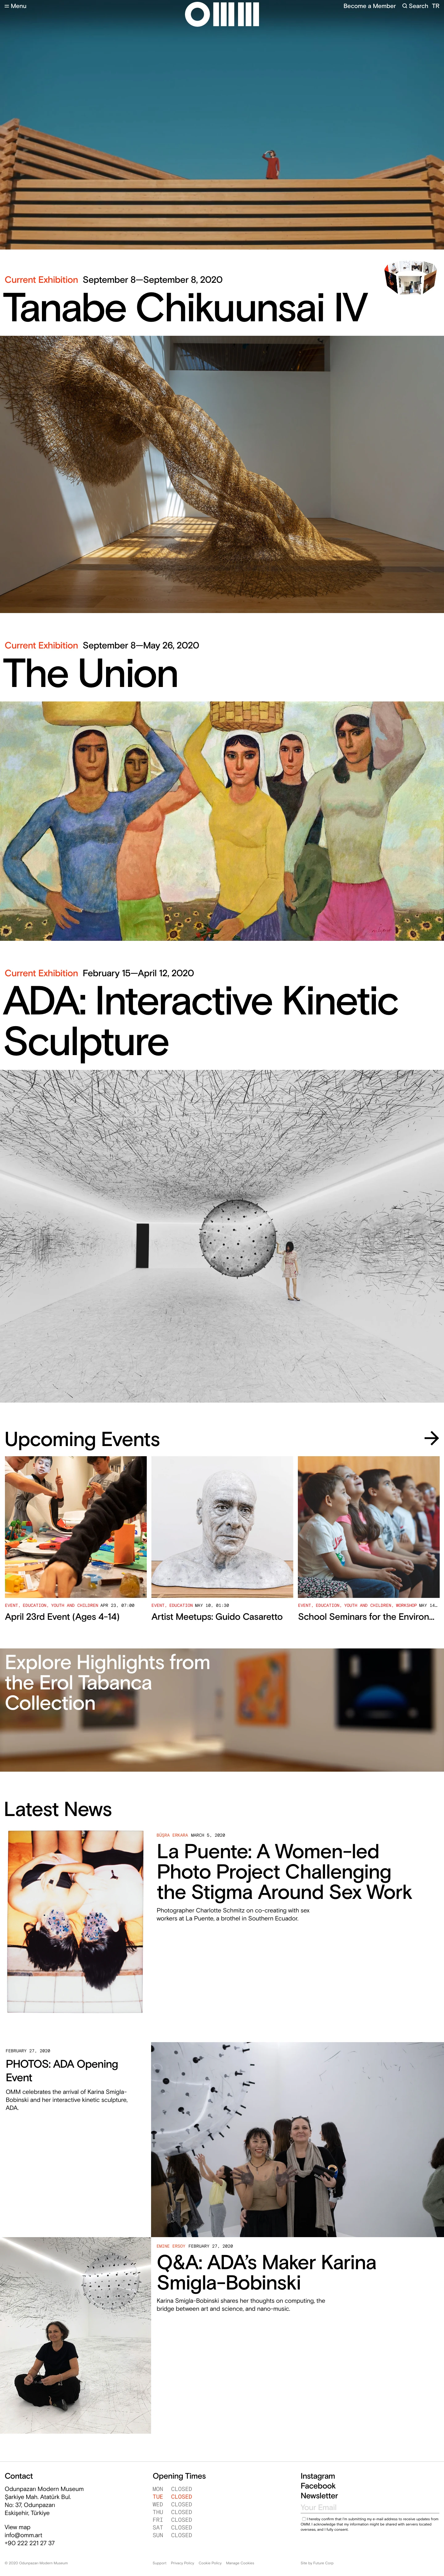 Odunpazarı Modern Museum Landing Page Example: Odunpazarı Modern Museum is a cross-cultural platform where modern and contemporary art from Turkey and abroad is exhibited with a universal perspective.